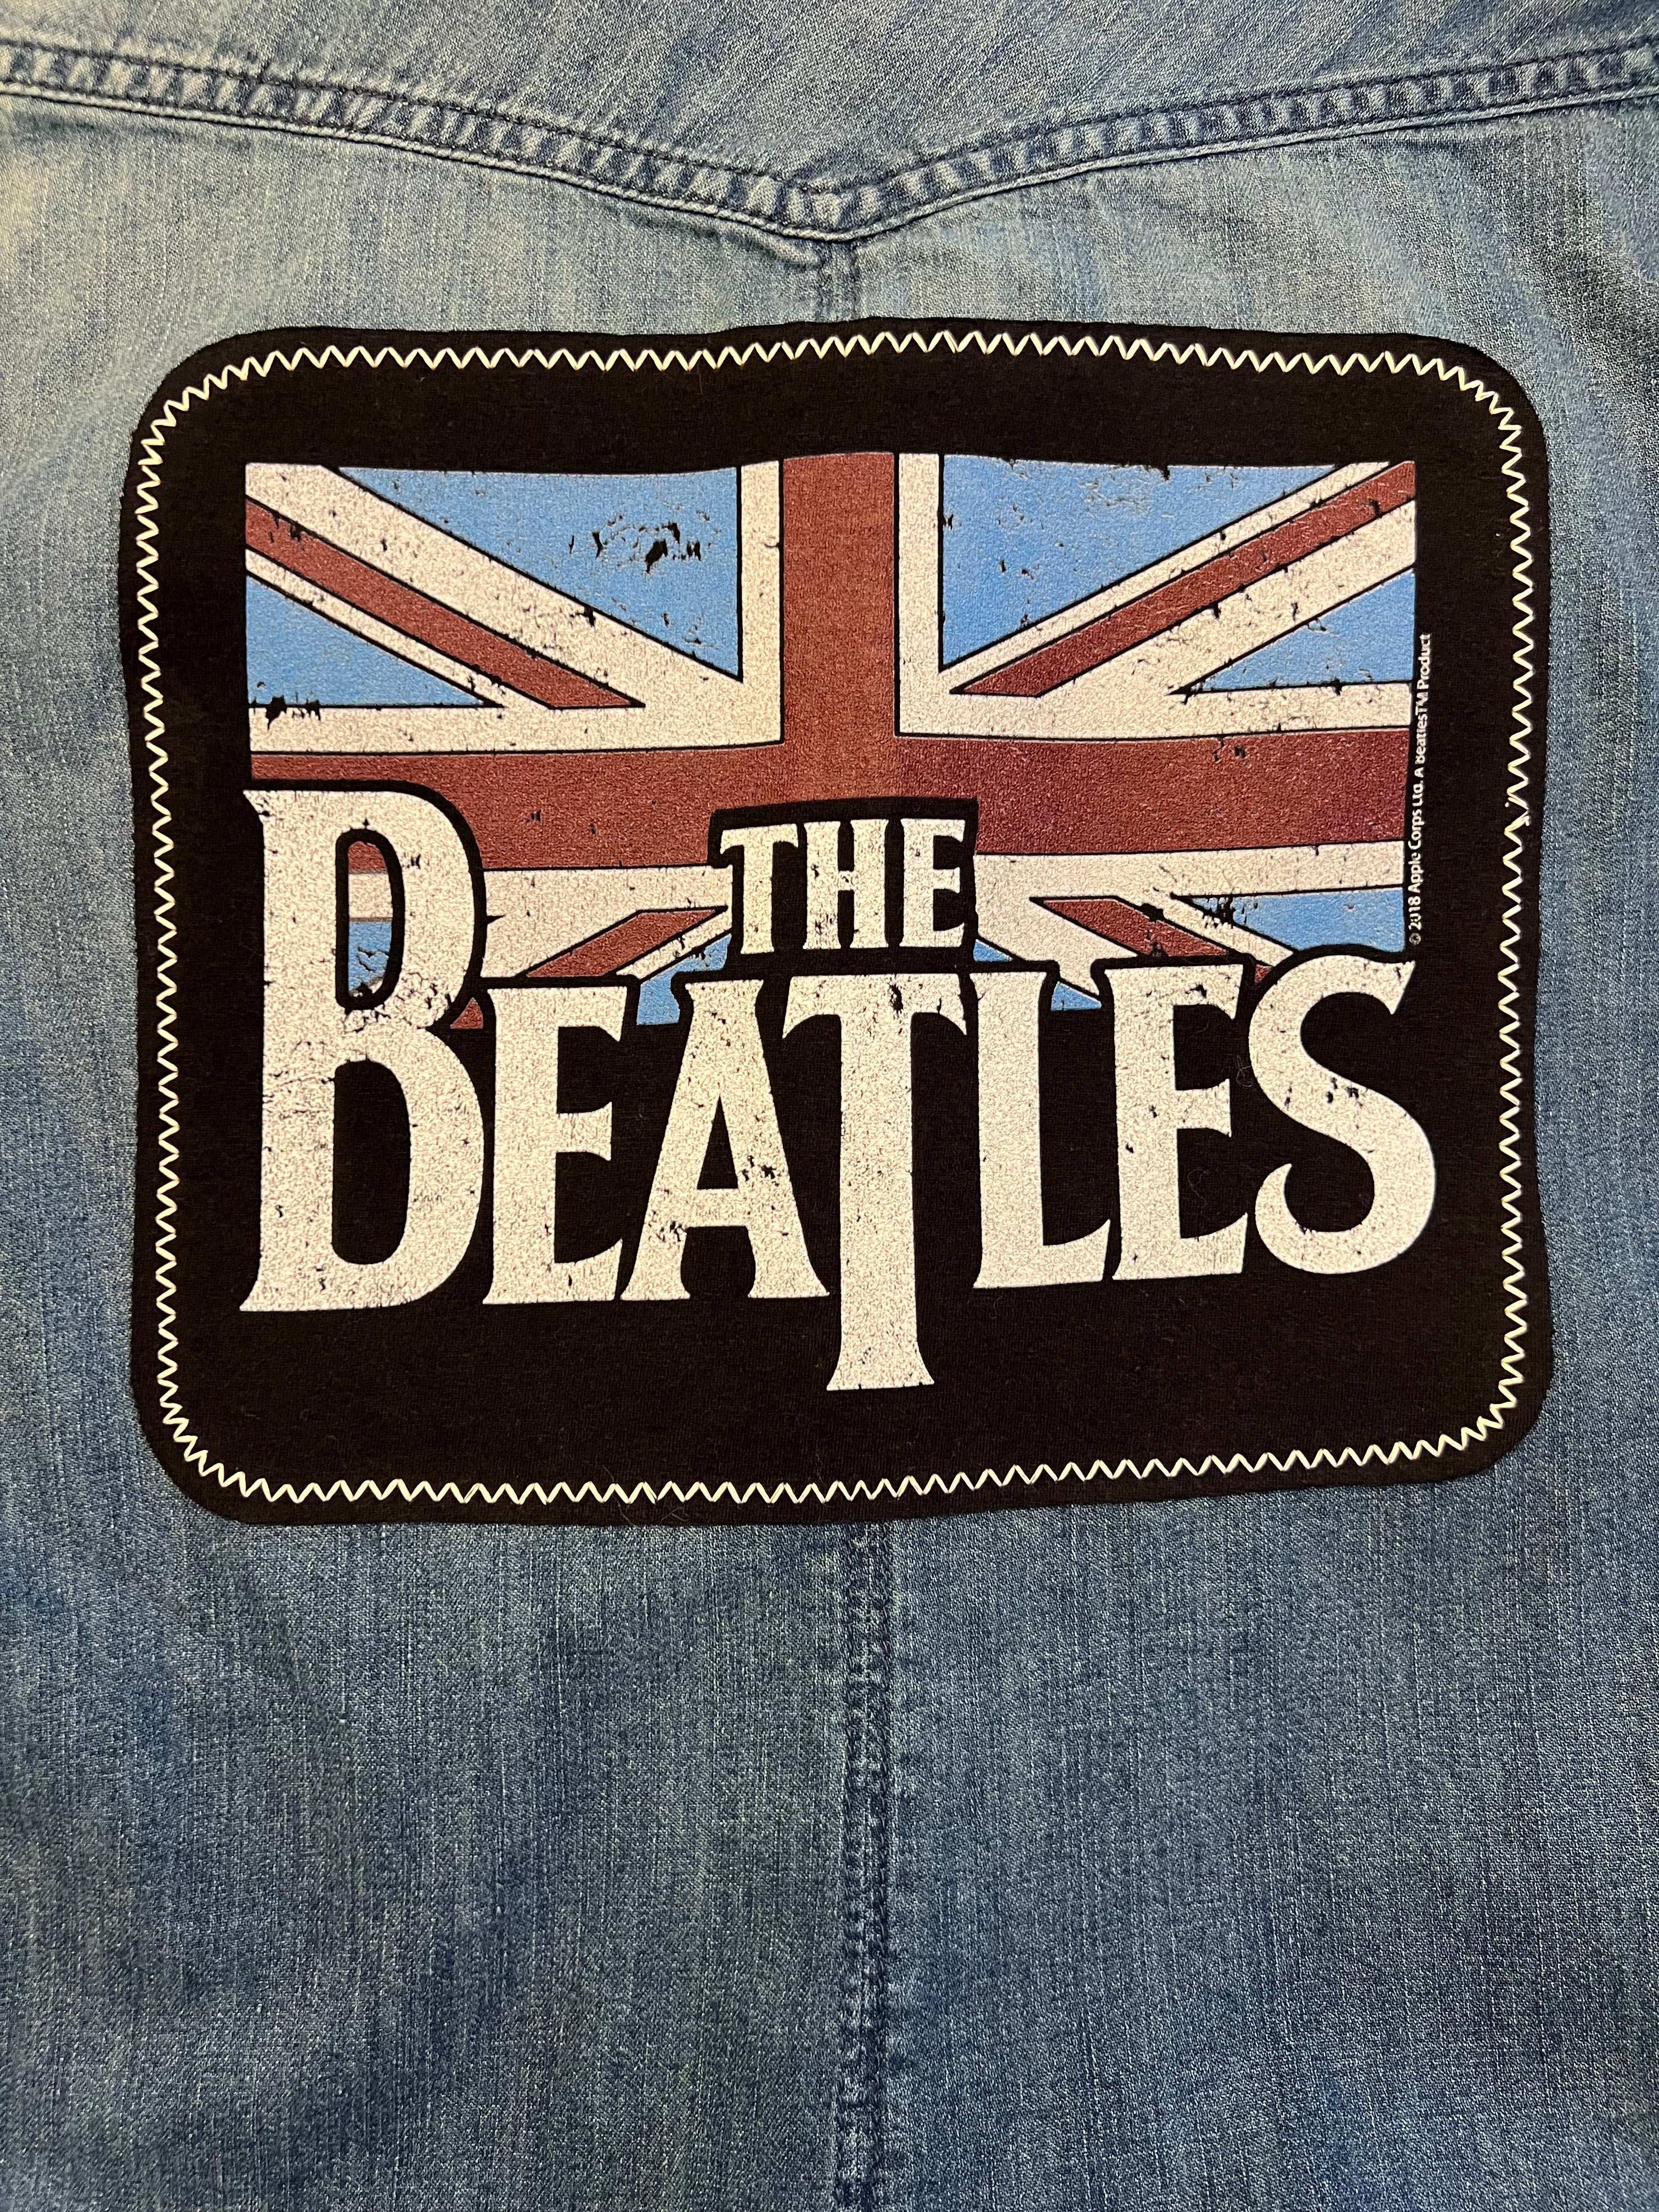 "Because" - The Beatles (Women’s - Size M)